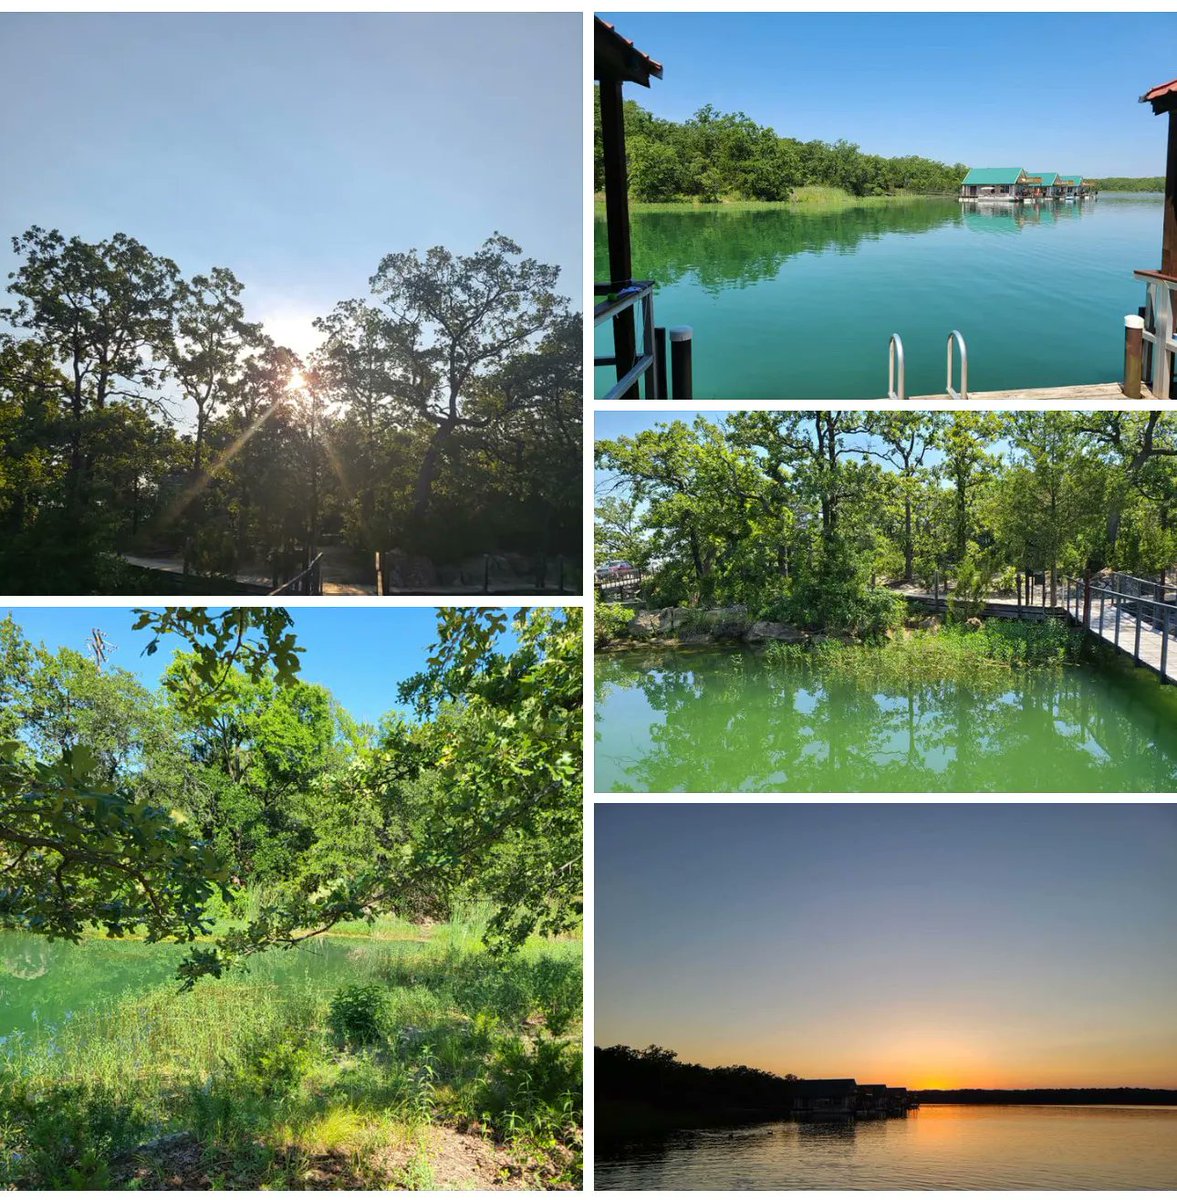 These views await!!😍 Coke see us at Lake Murray Floating Cabins for a relaxing and beautiful stay! 

Call us today and book your stay! 580-223-0088 or check out our website for more info and availability 
lakemurrayfloatingcabins.com

(Photos courtesy of our guest Stacy Dynice)